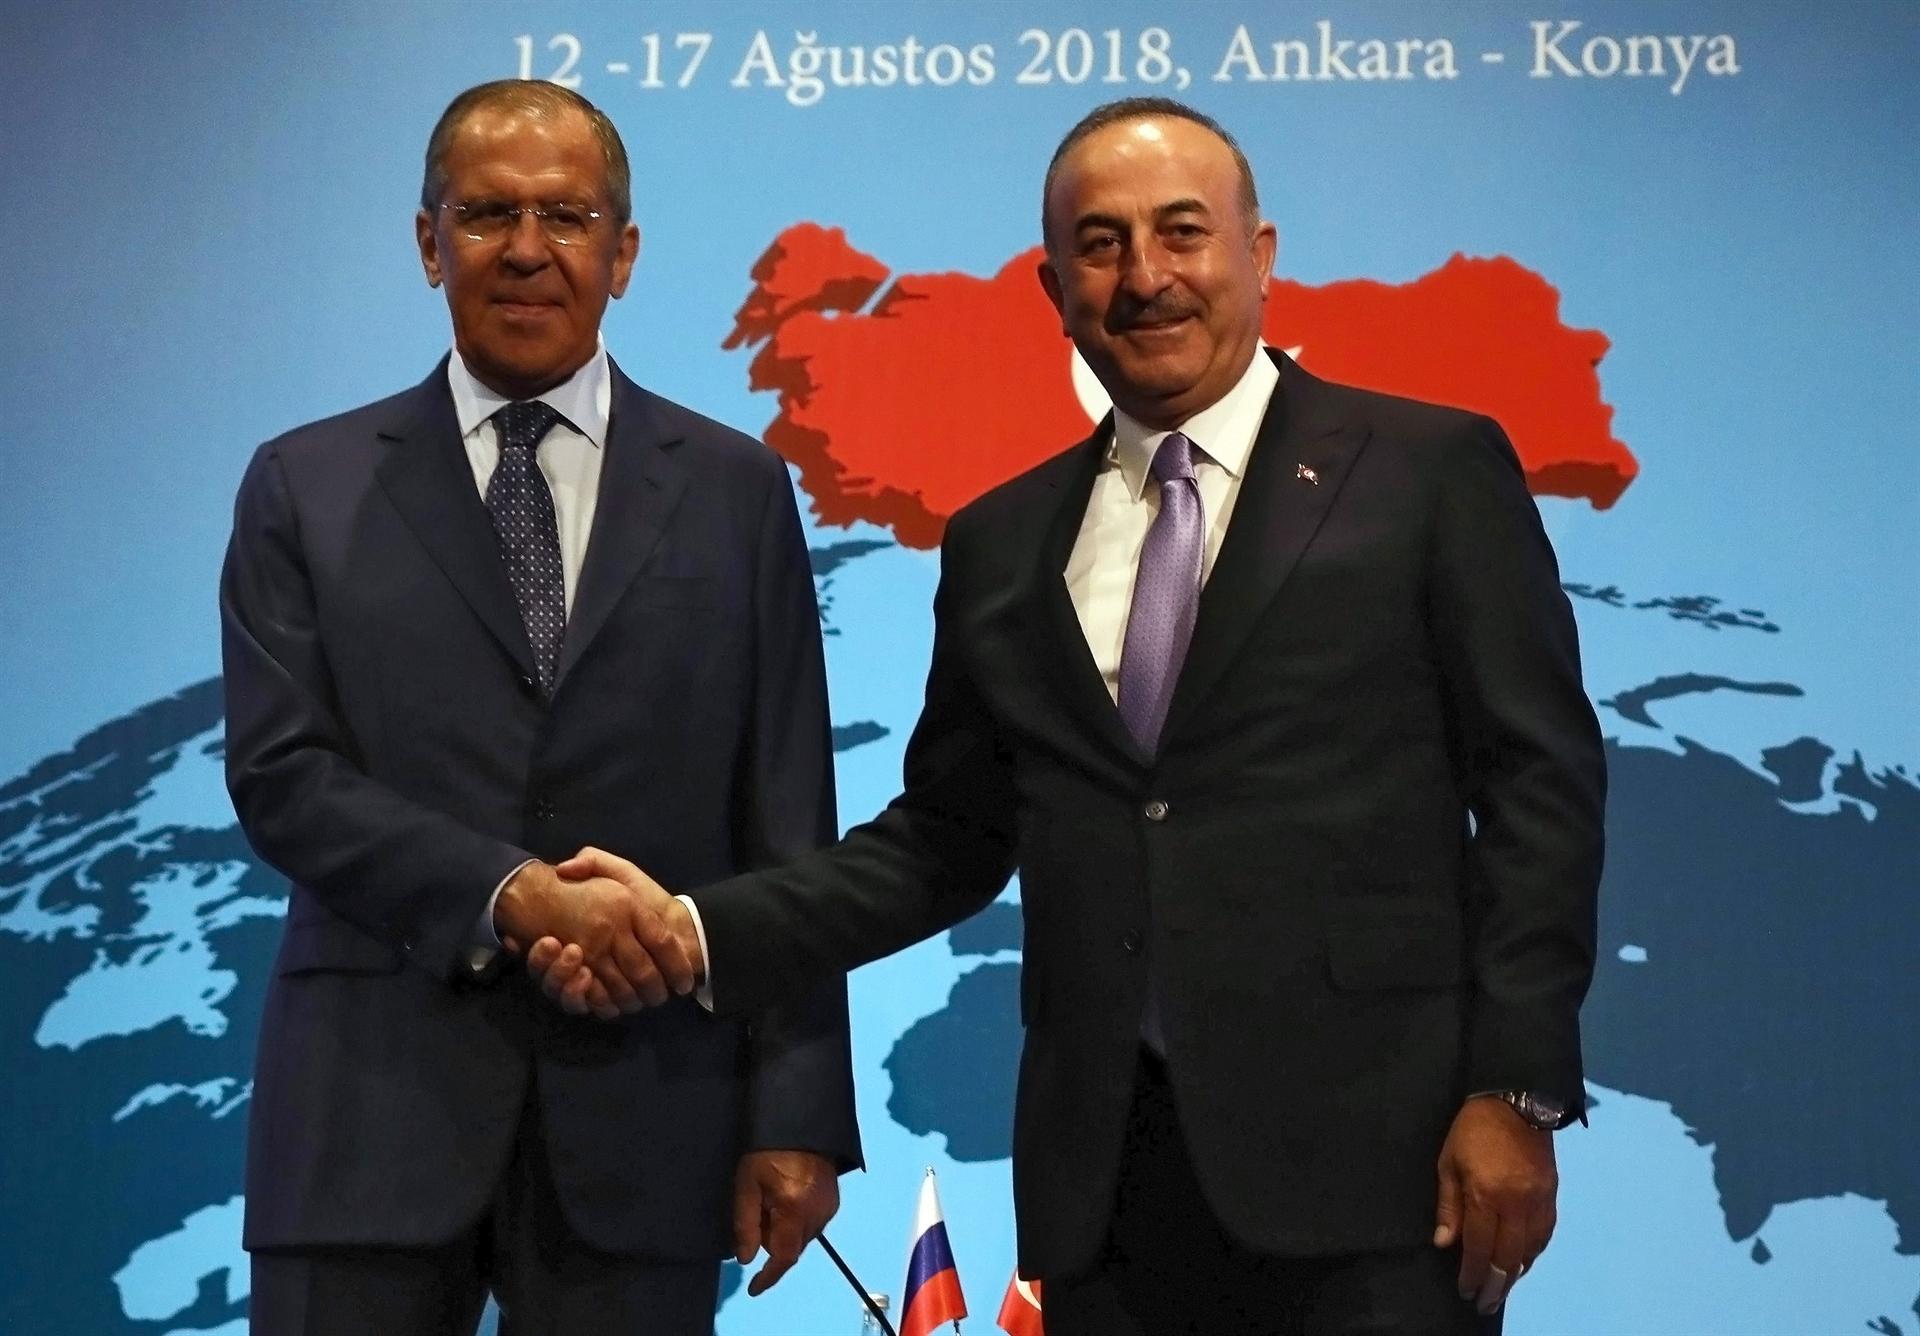 US sanctions hurting its own reputation, Turkish FM says after meeting Russia’s Lavrov – Hurriyet